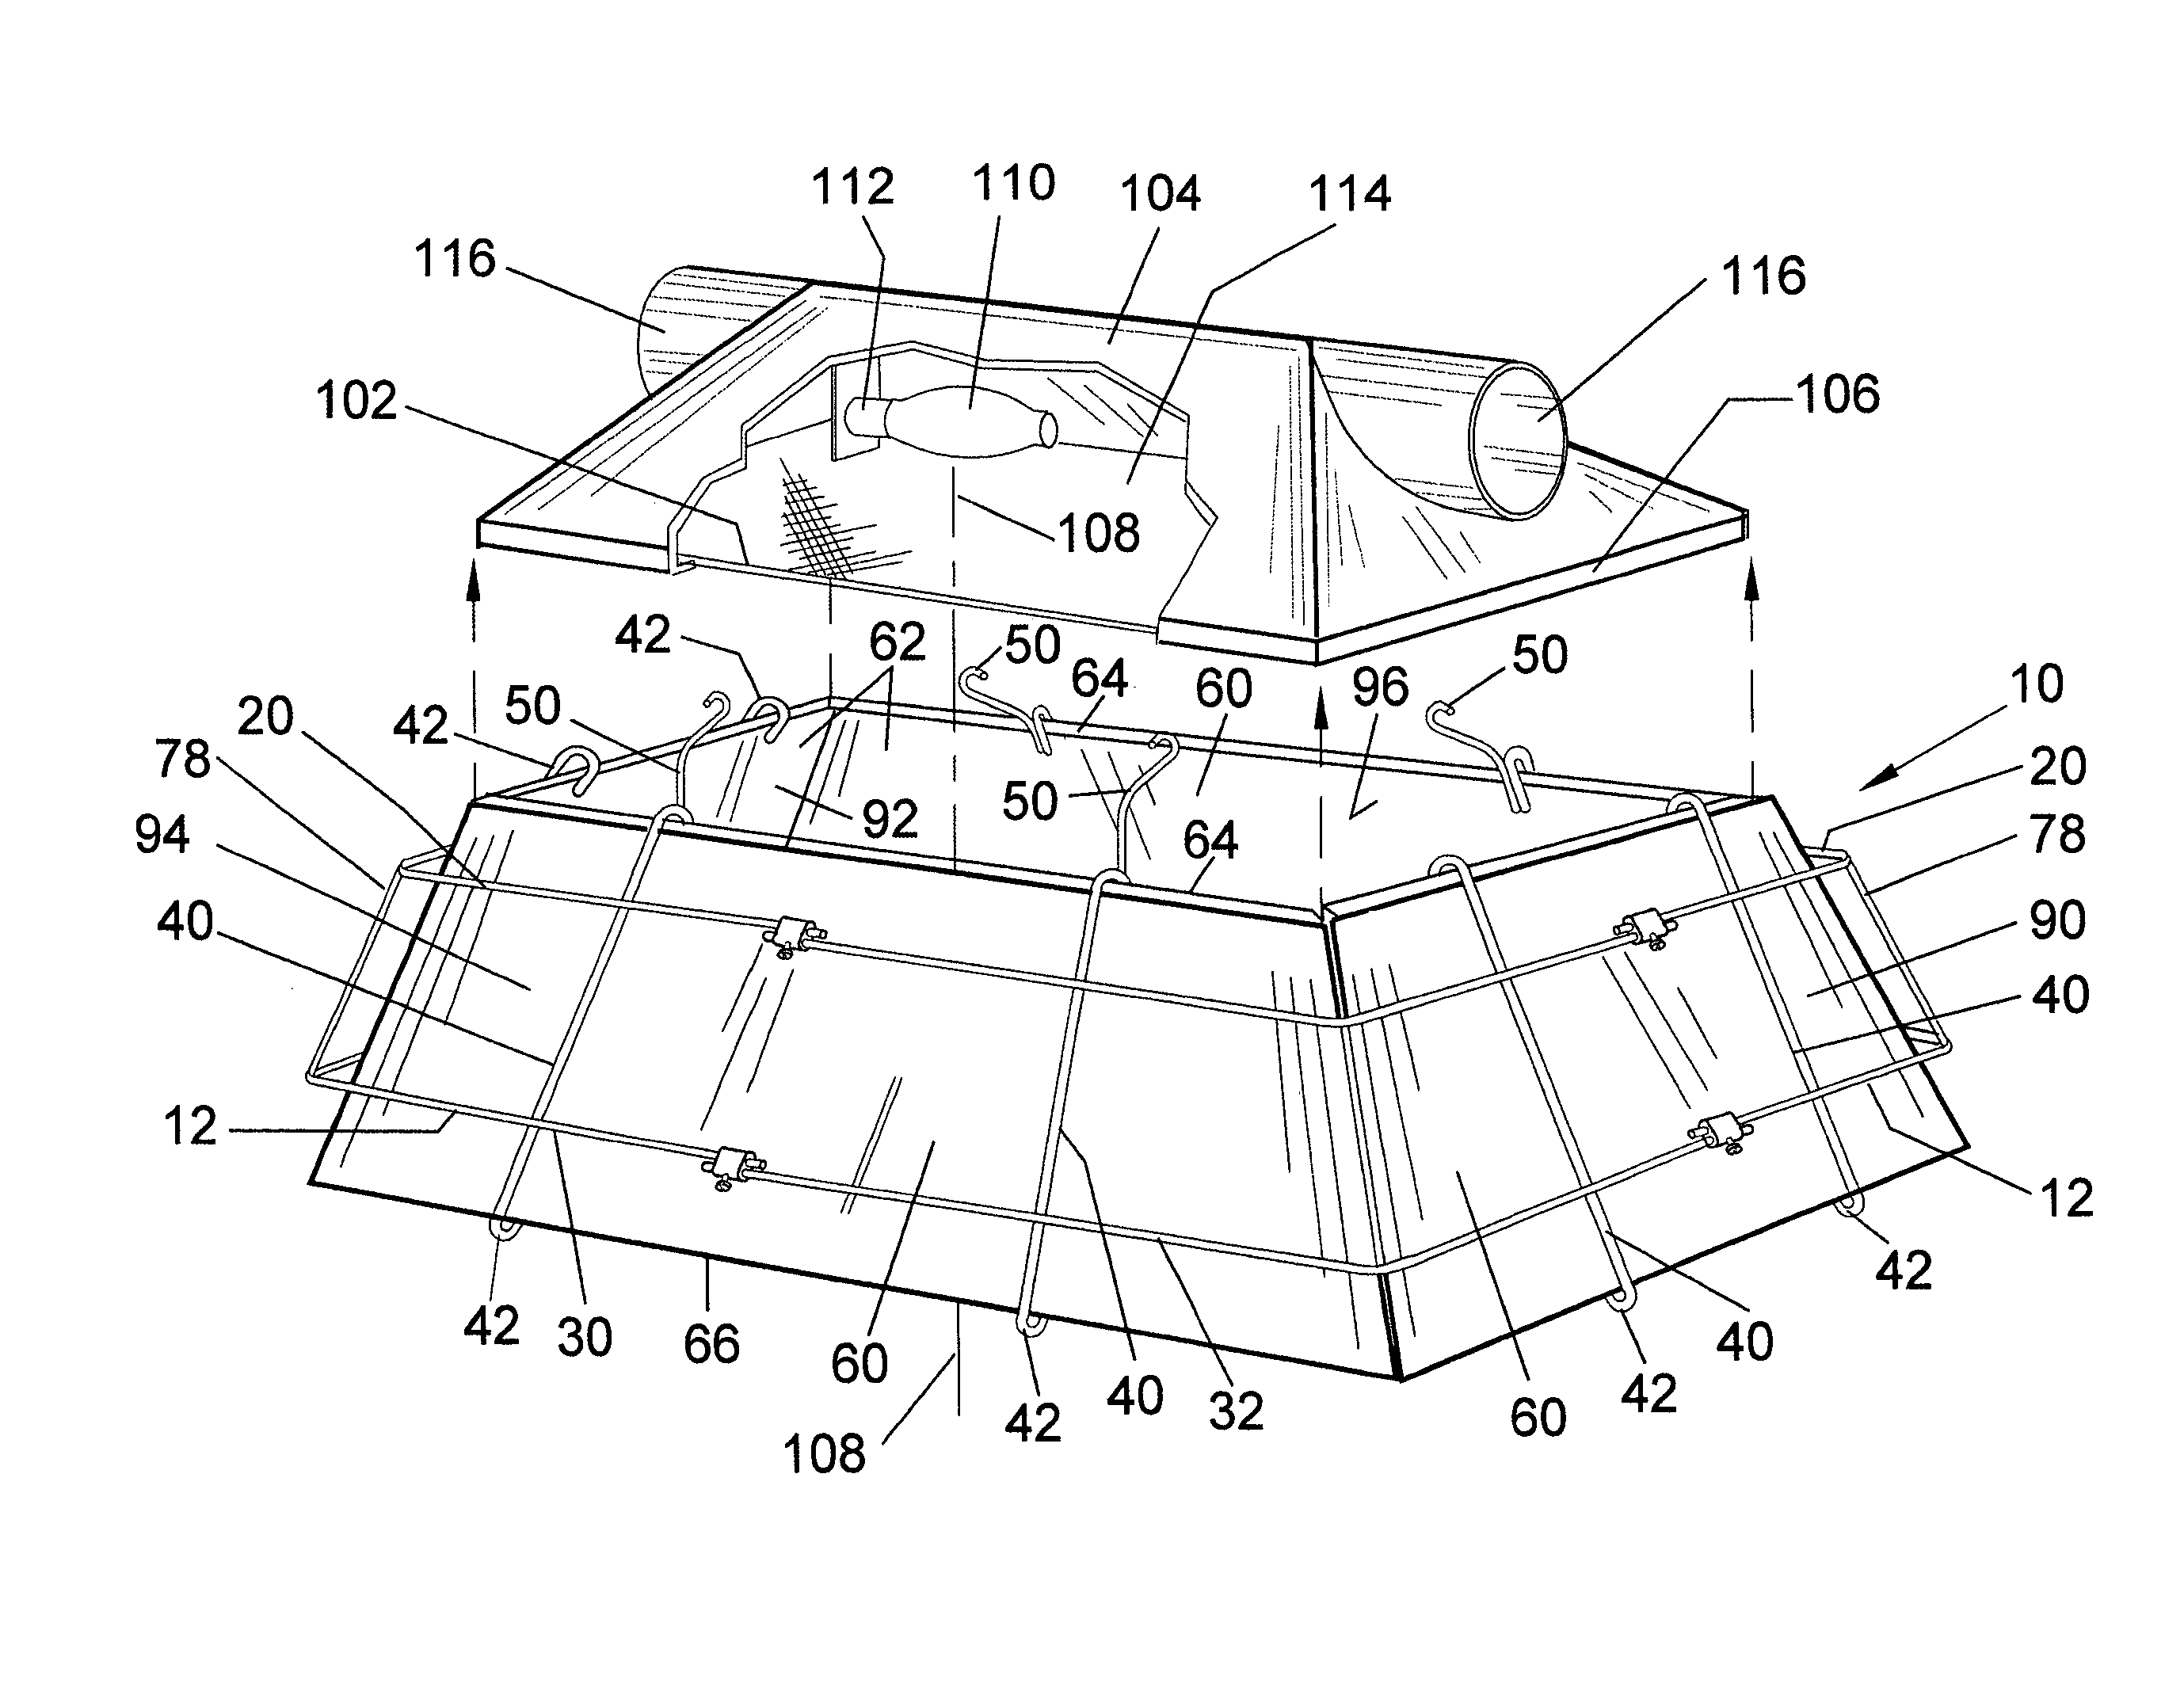 Light reflector structure for horticultural lamps